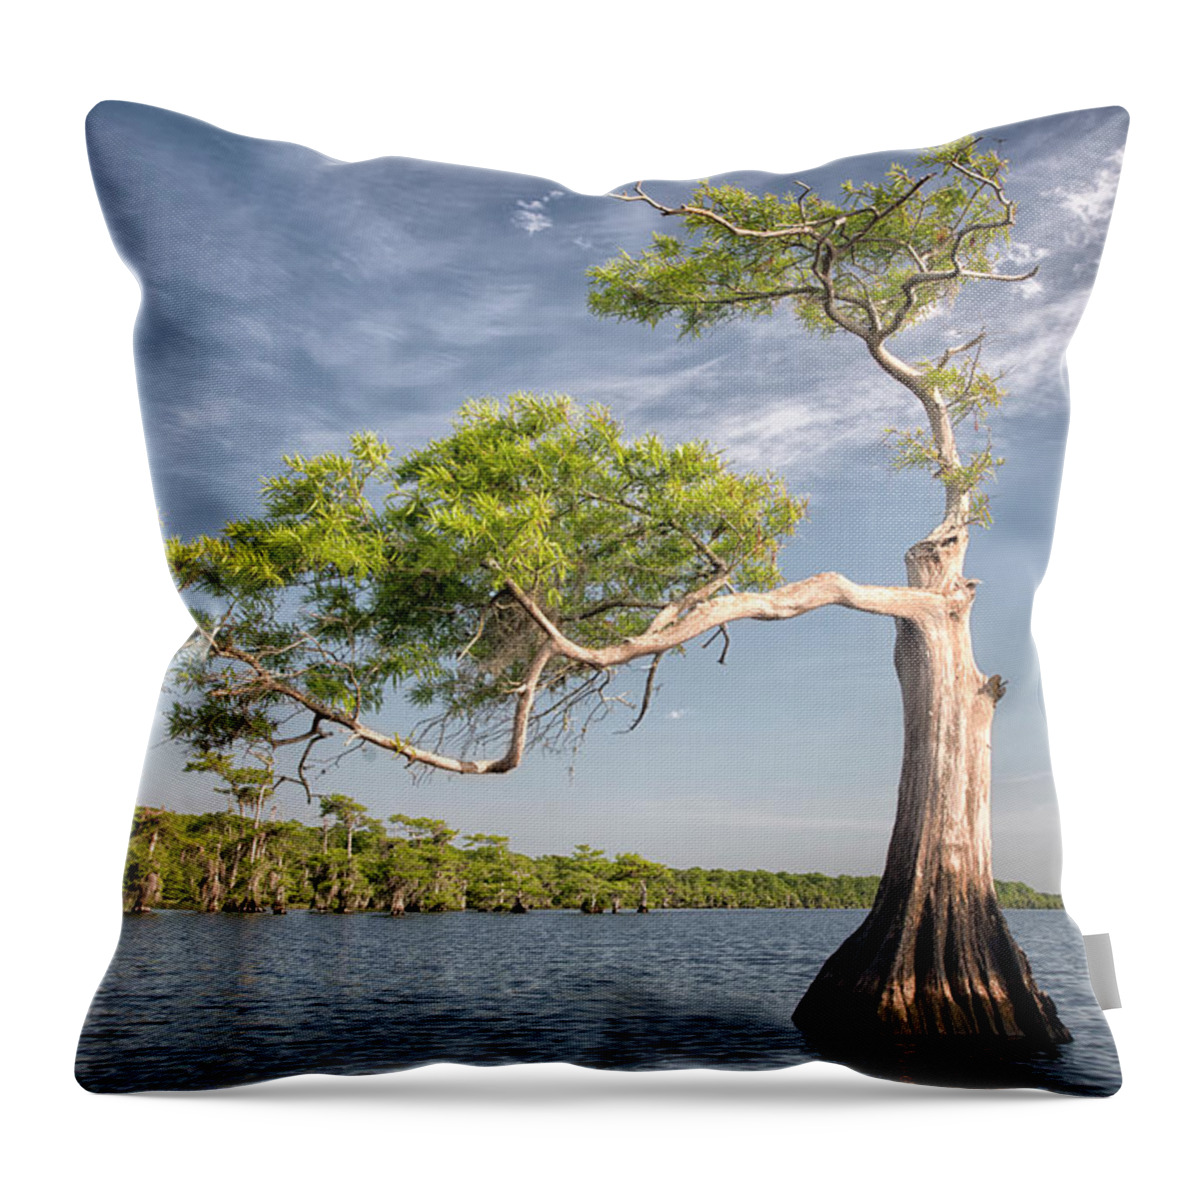 Crystal Yingling Throw Pillow featuring the photograph Morning Stretch by Ghostwinds Photography